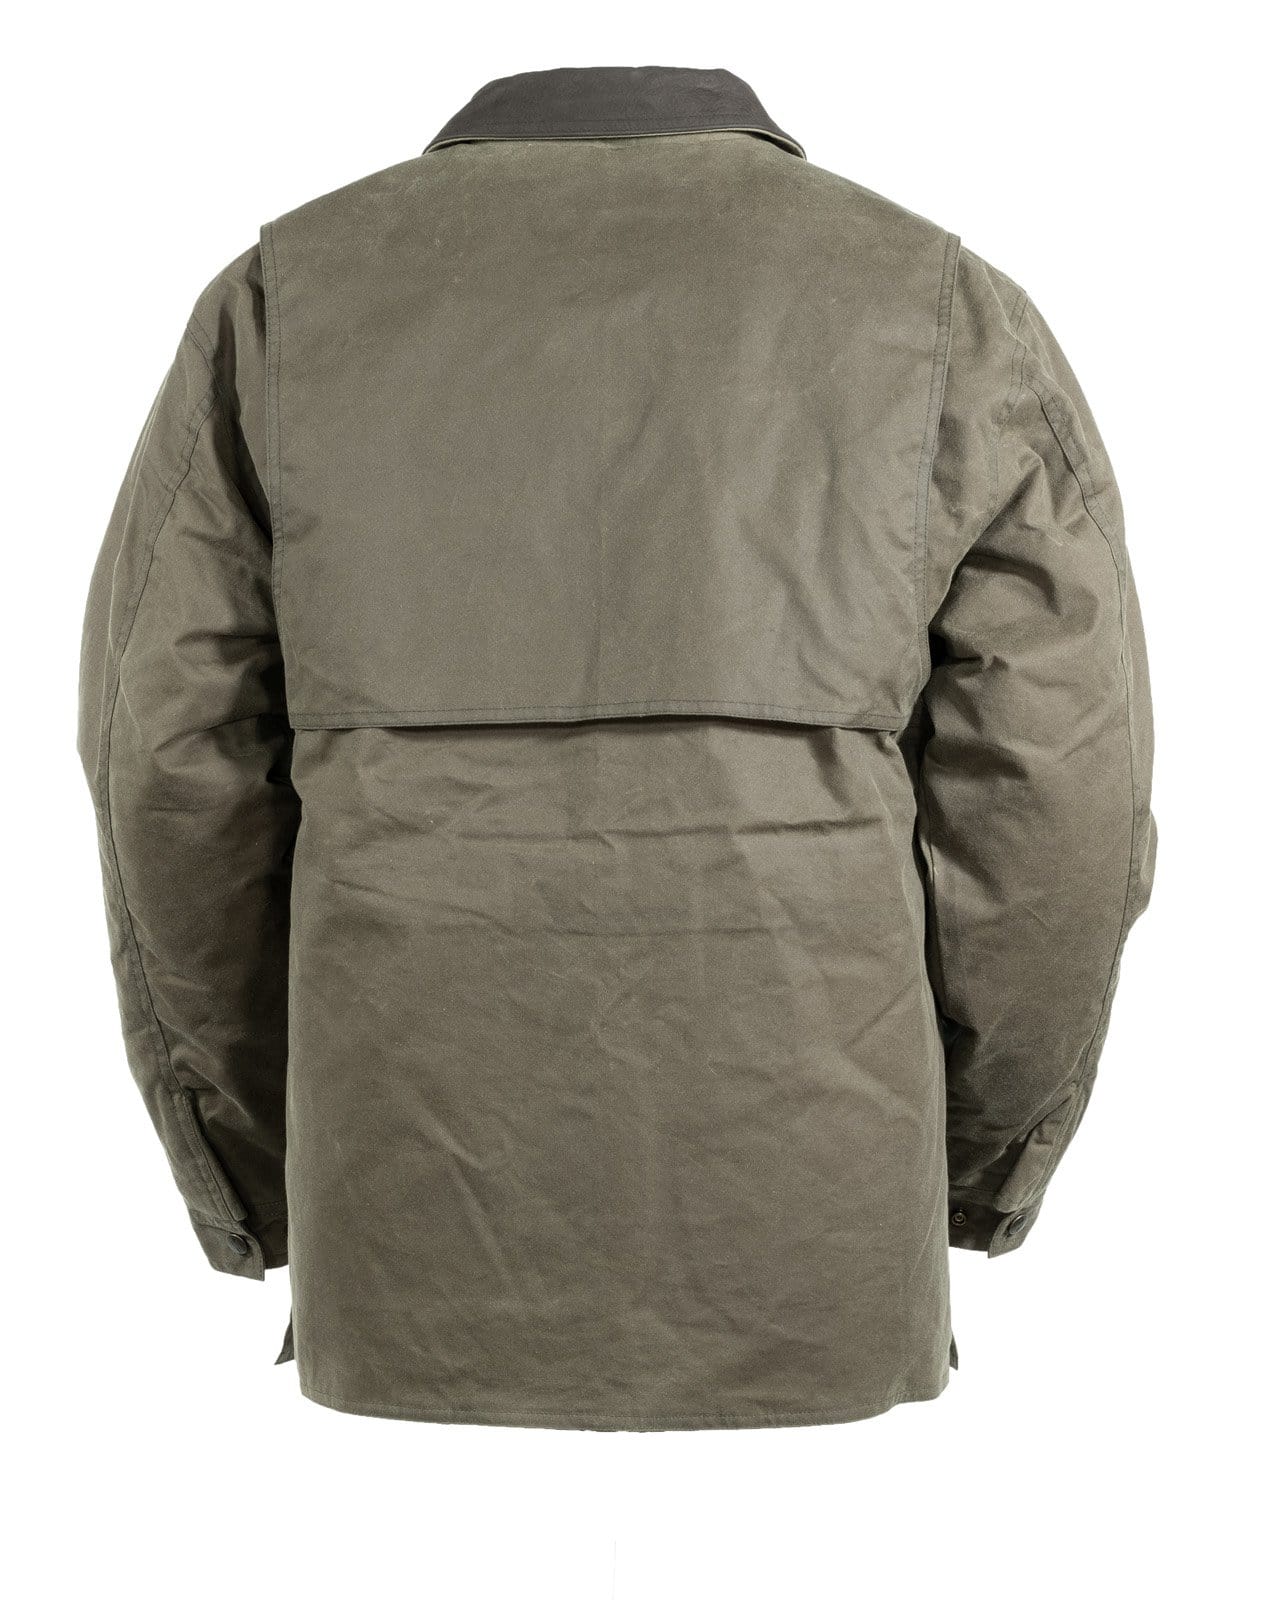 Men’s Gidley Jacket | Jackets by Outback Trading Company ...